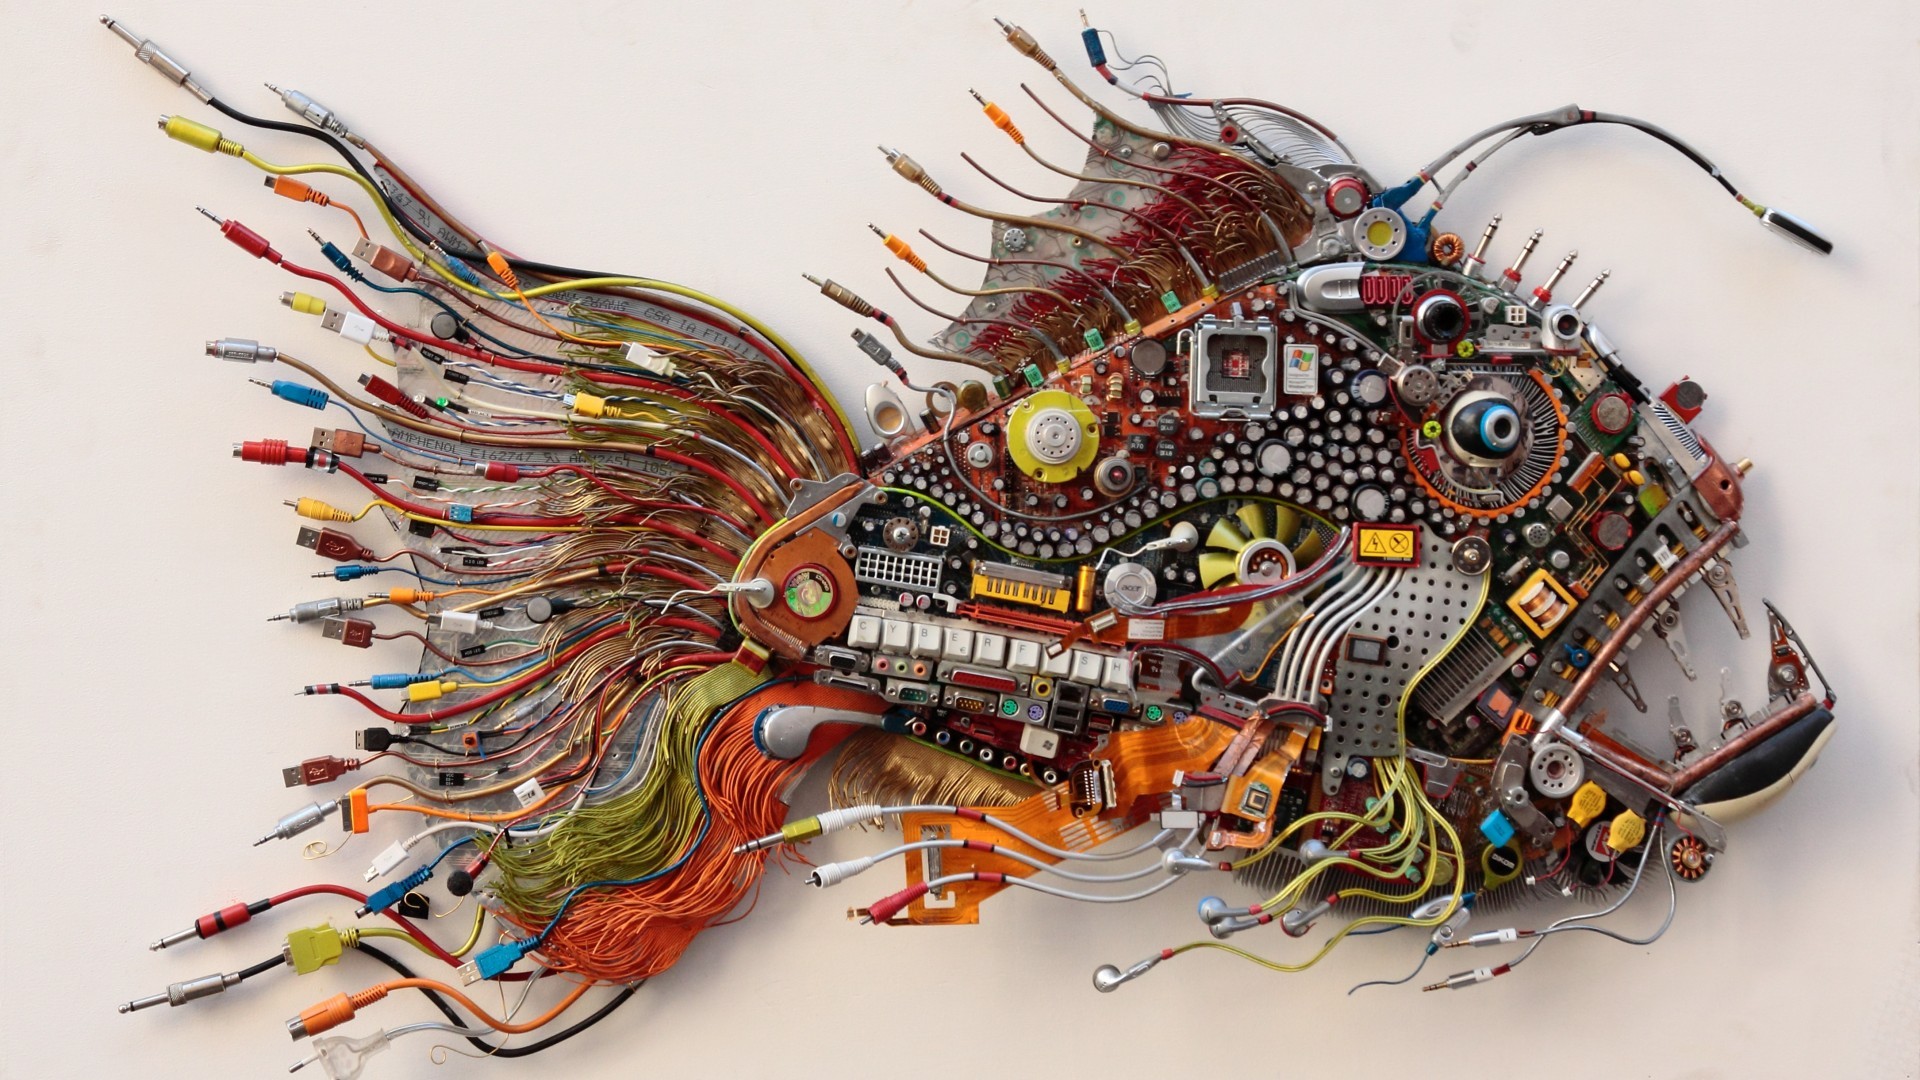 Artwork Wires Earphones Motherboards Electronics White Background USB Microchip Fans Cyber Keyboards 1920x1080